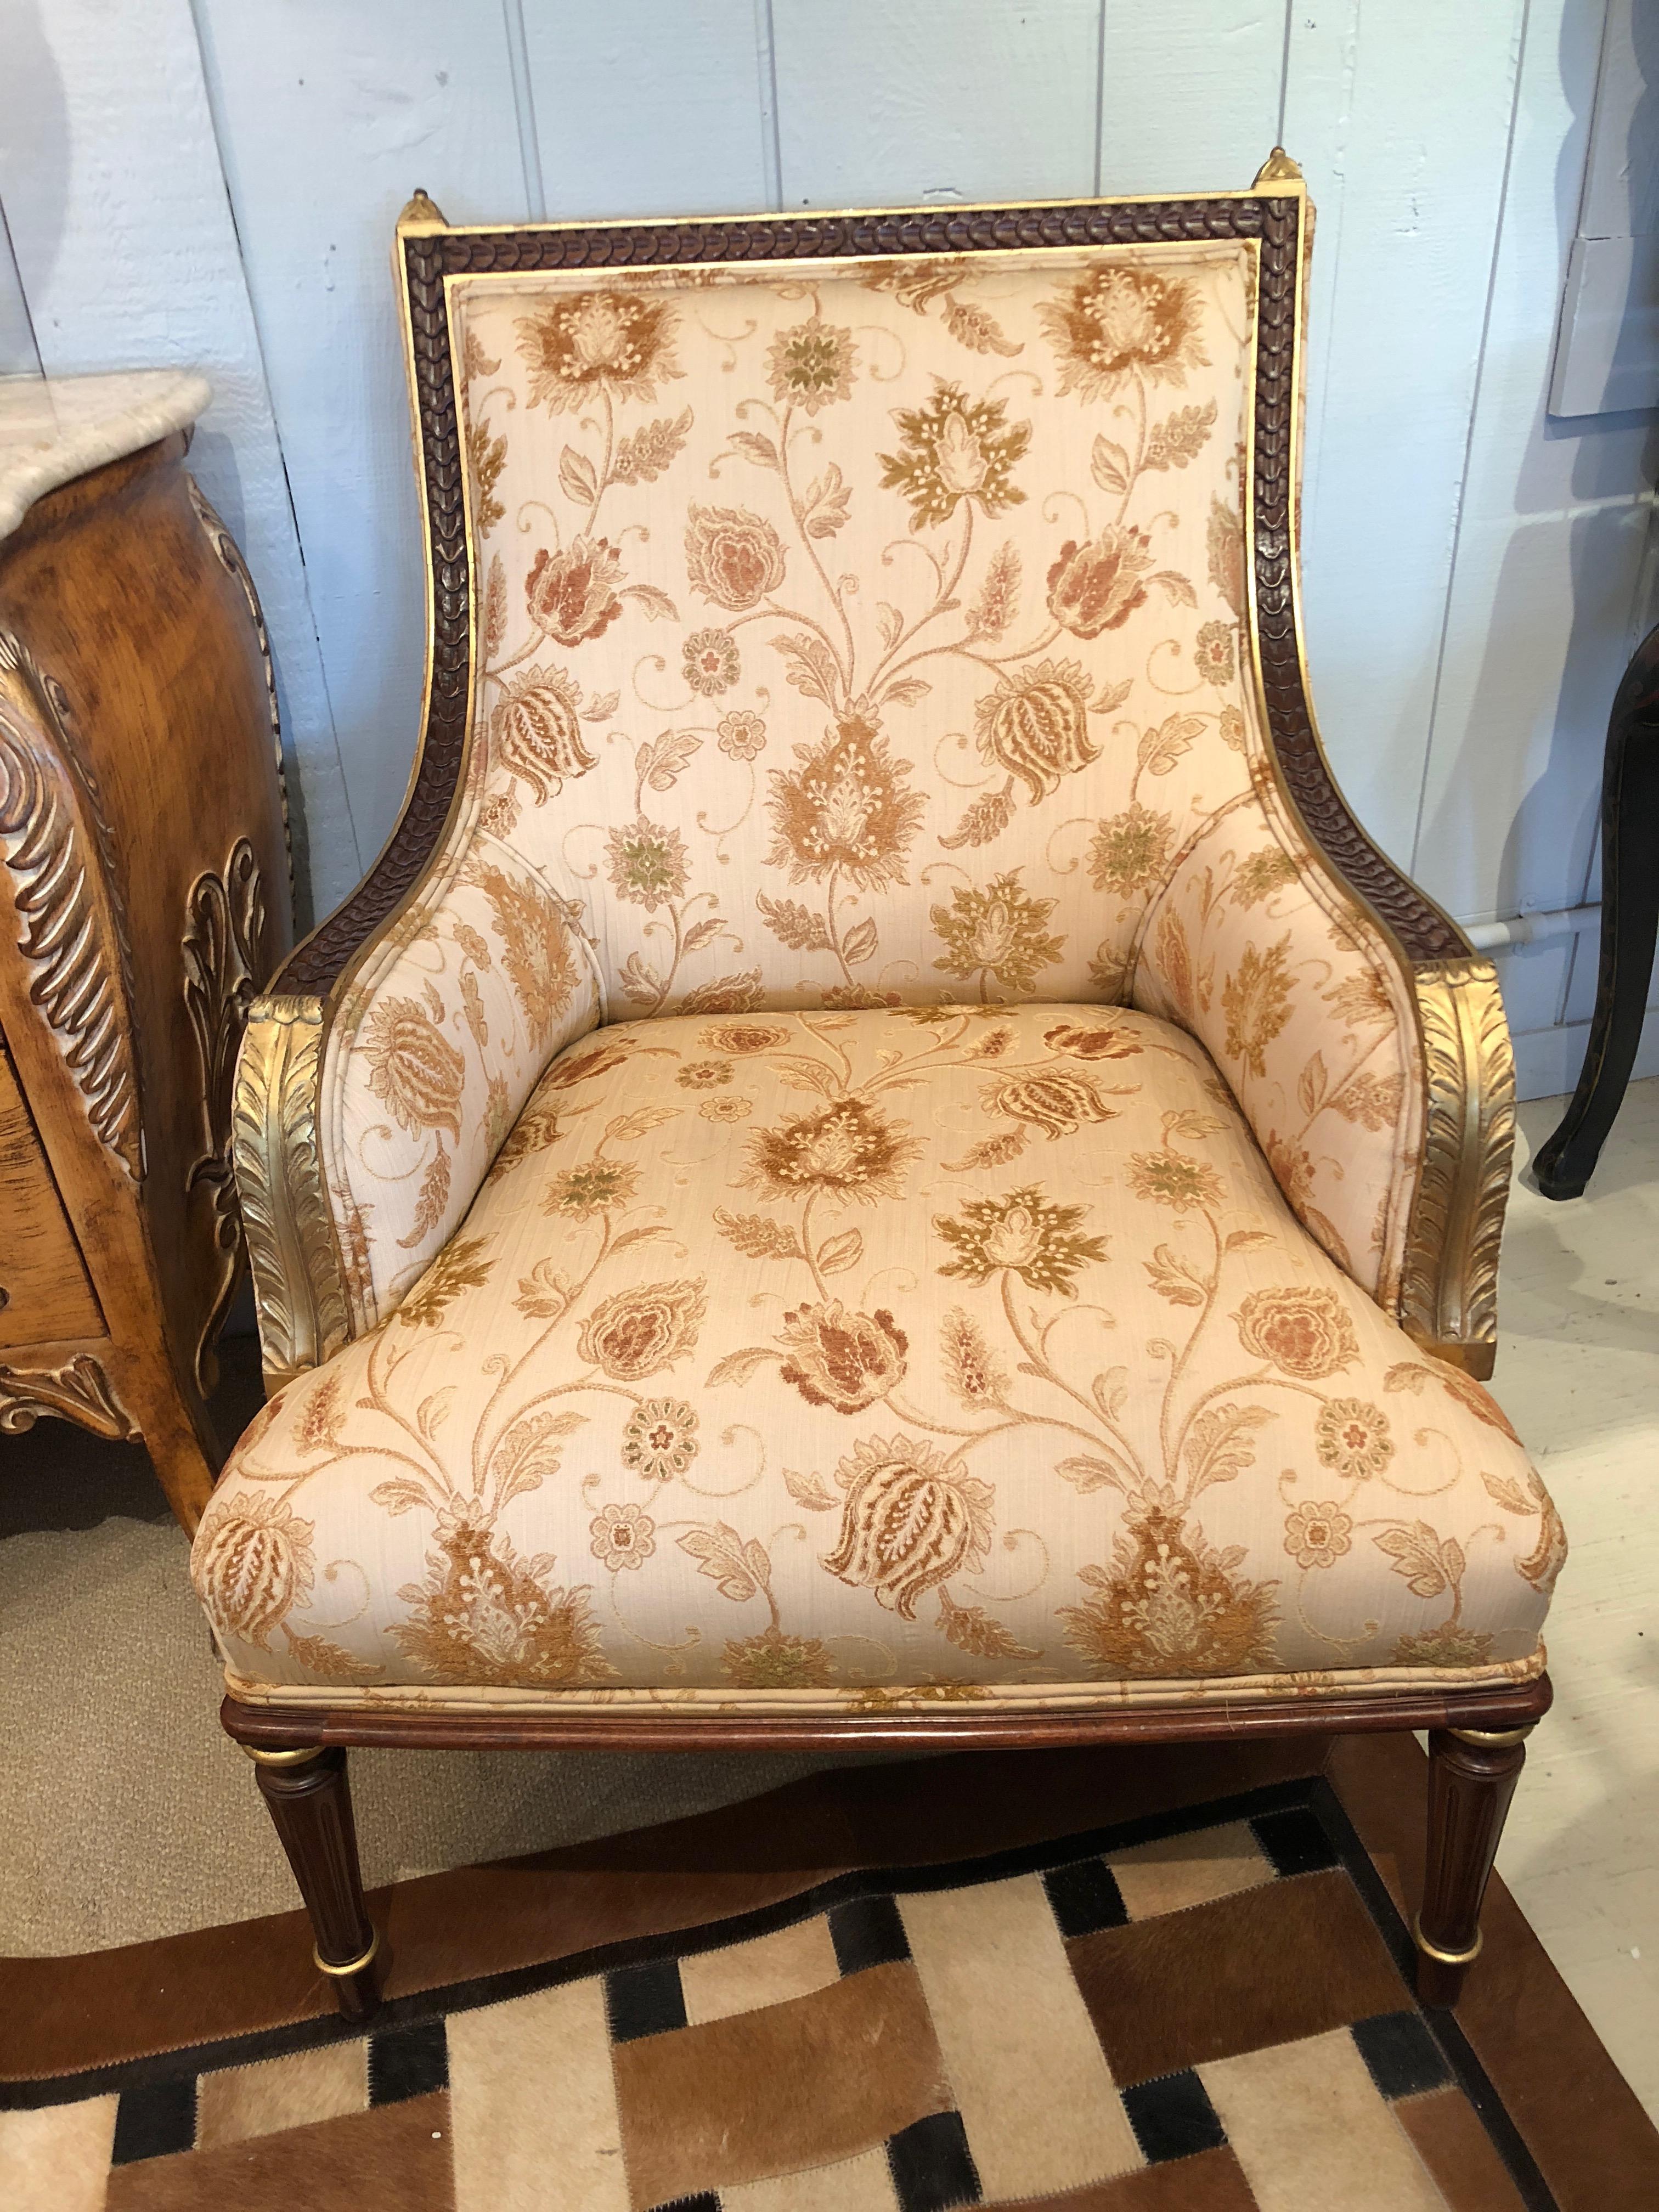 A comfortable beautifully made pair of French style bergère chairs having elaborately carved and gilded wood and pretty neutral floral upholstery in cream, brown, orange and gold.